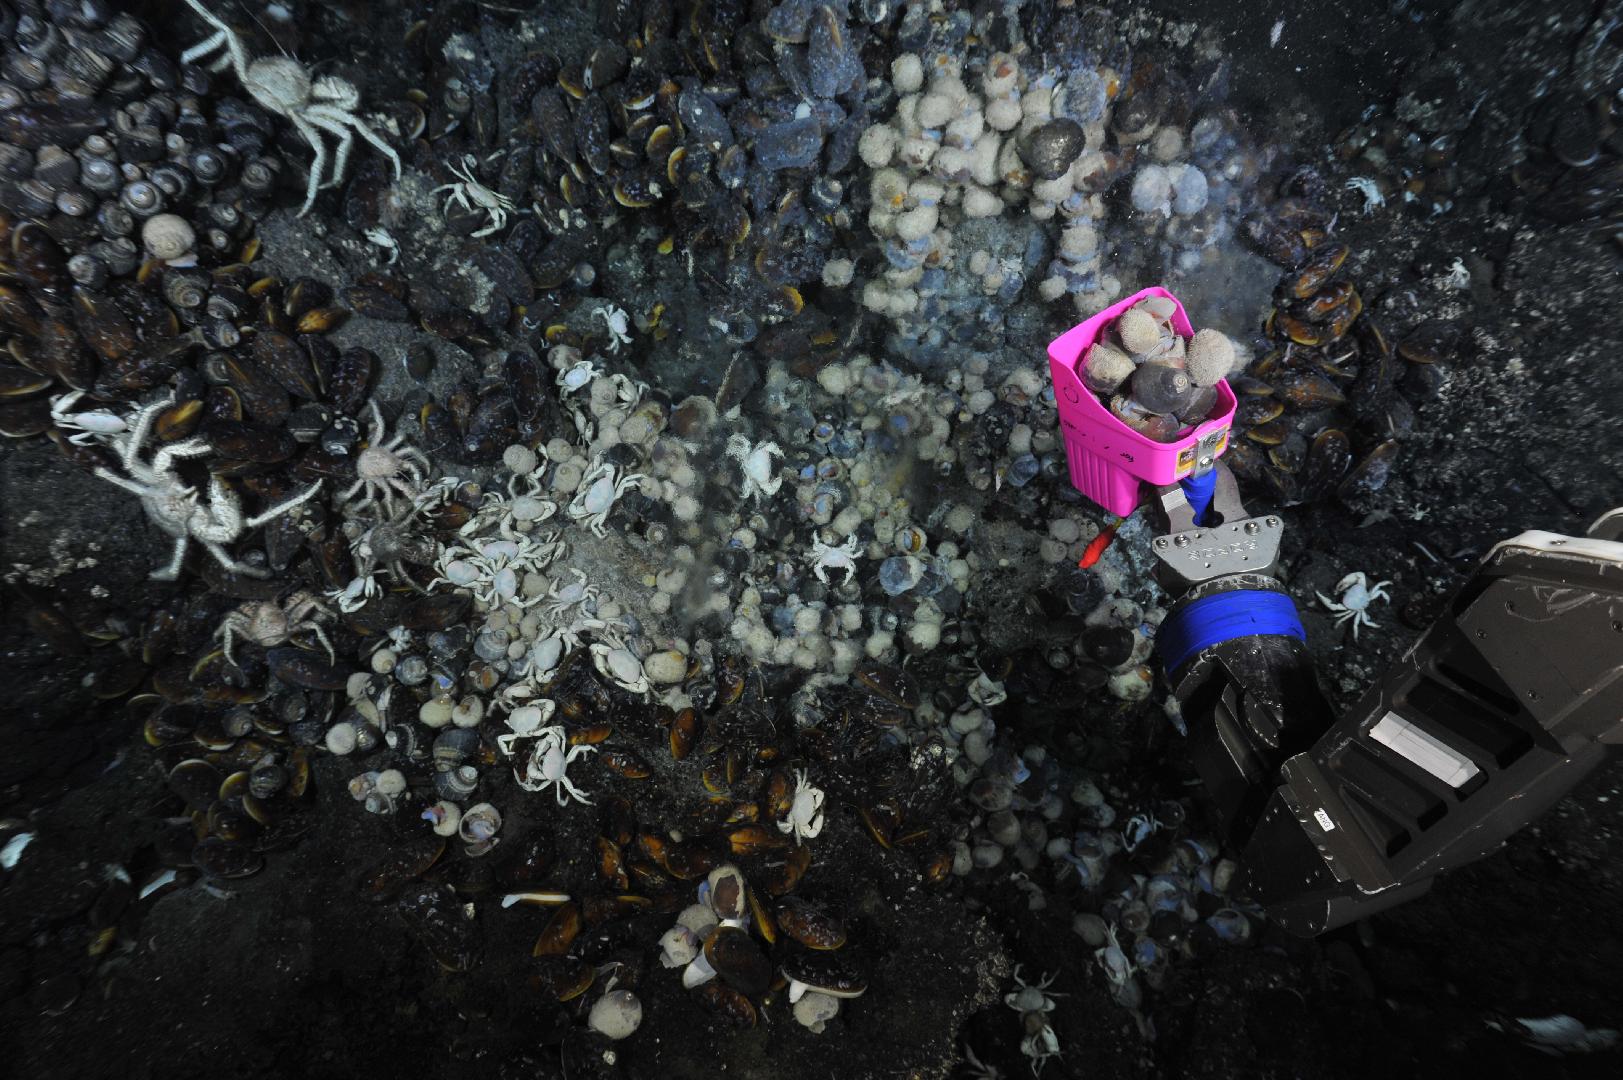 Photo shows a number of different deep sea mollusks, black and gray in color, as a robotic arm painted pink and blue gathers a sample.